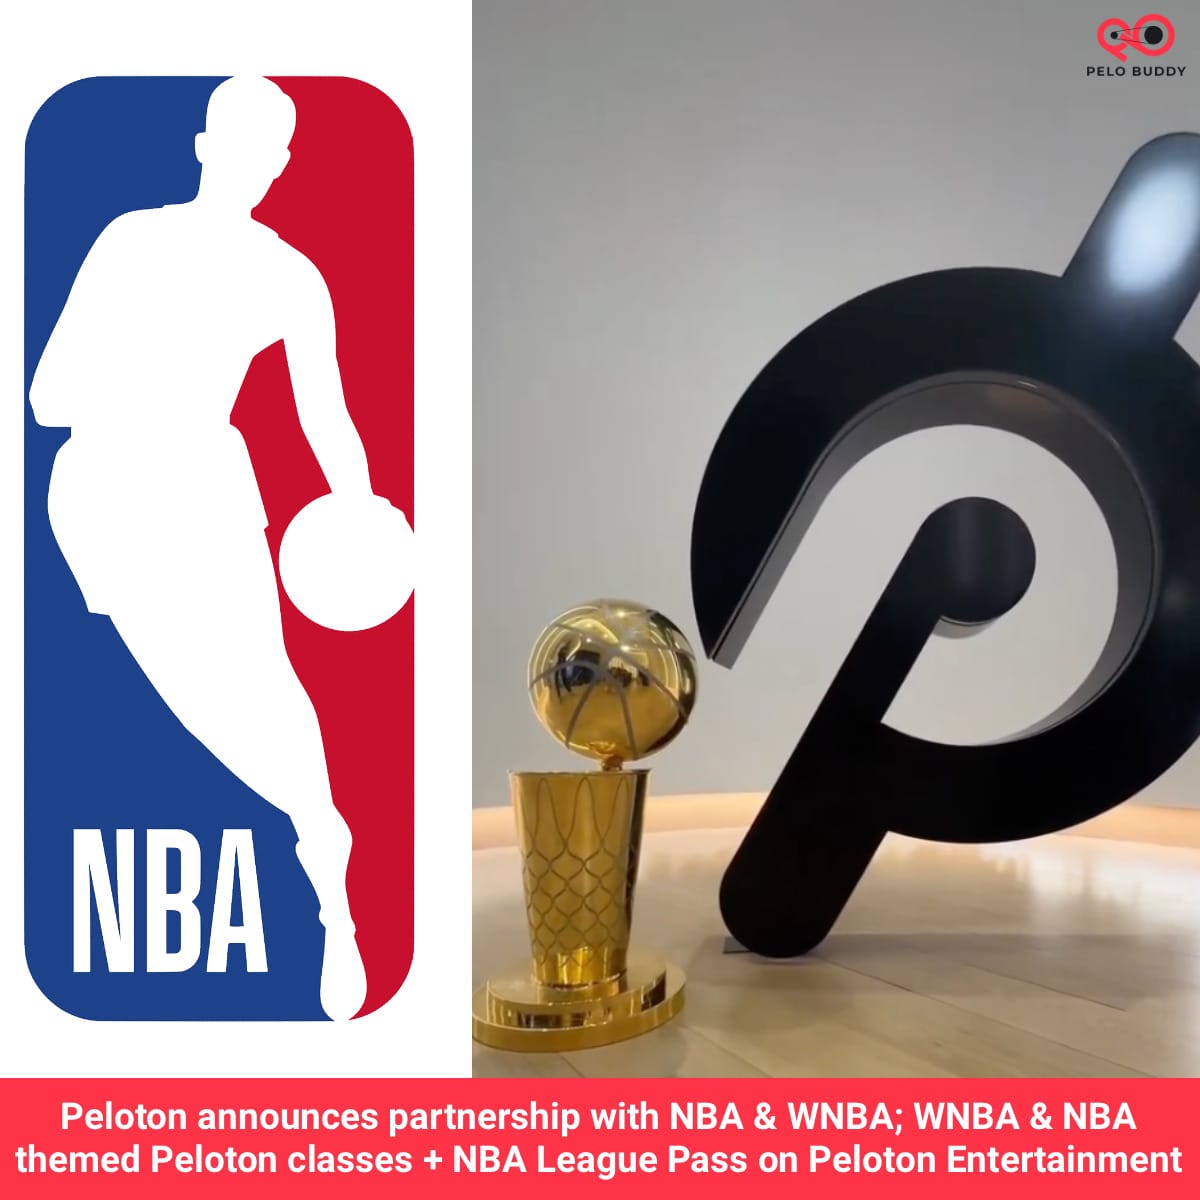 NBA League Pass: what is it, price, apps and all you need to know